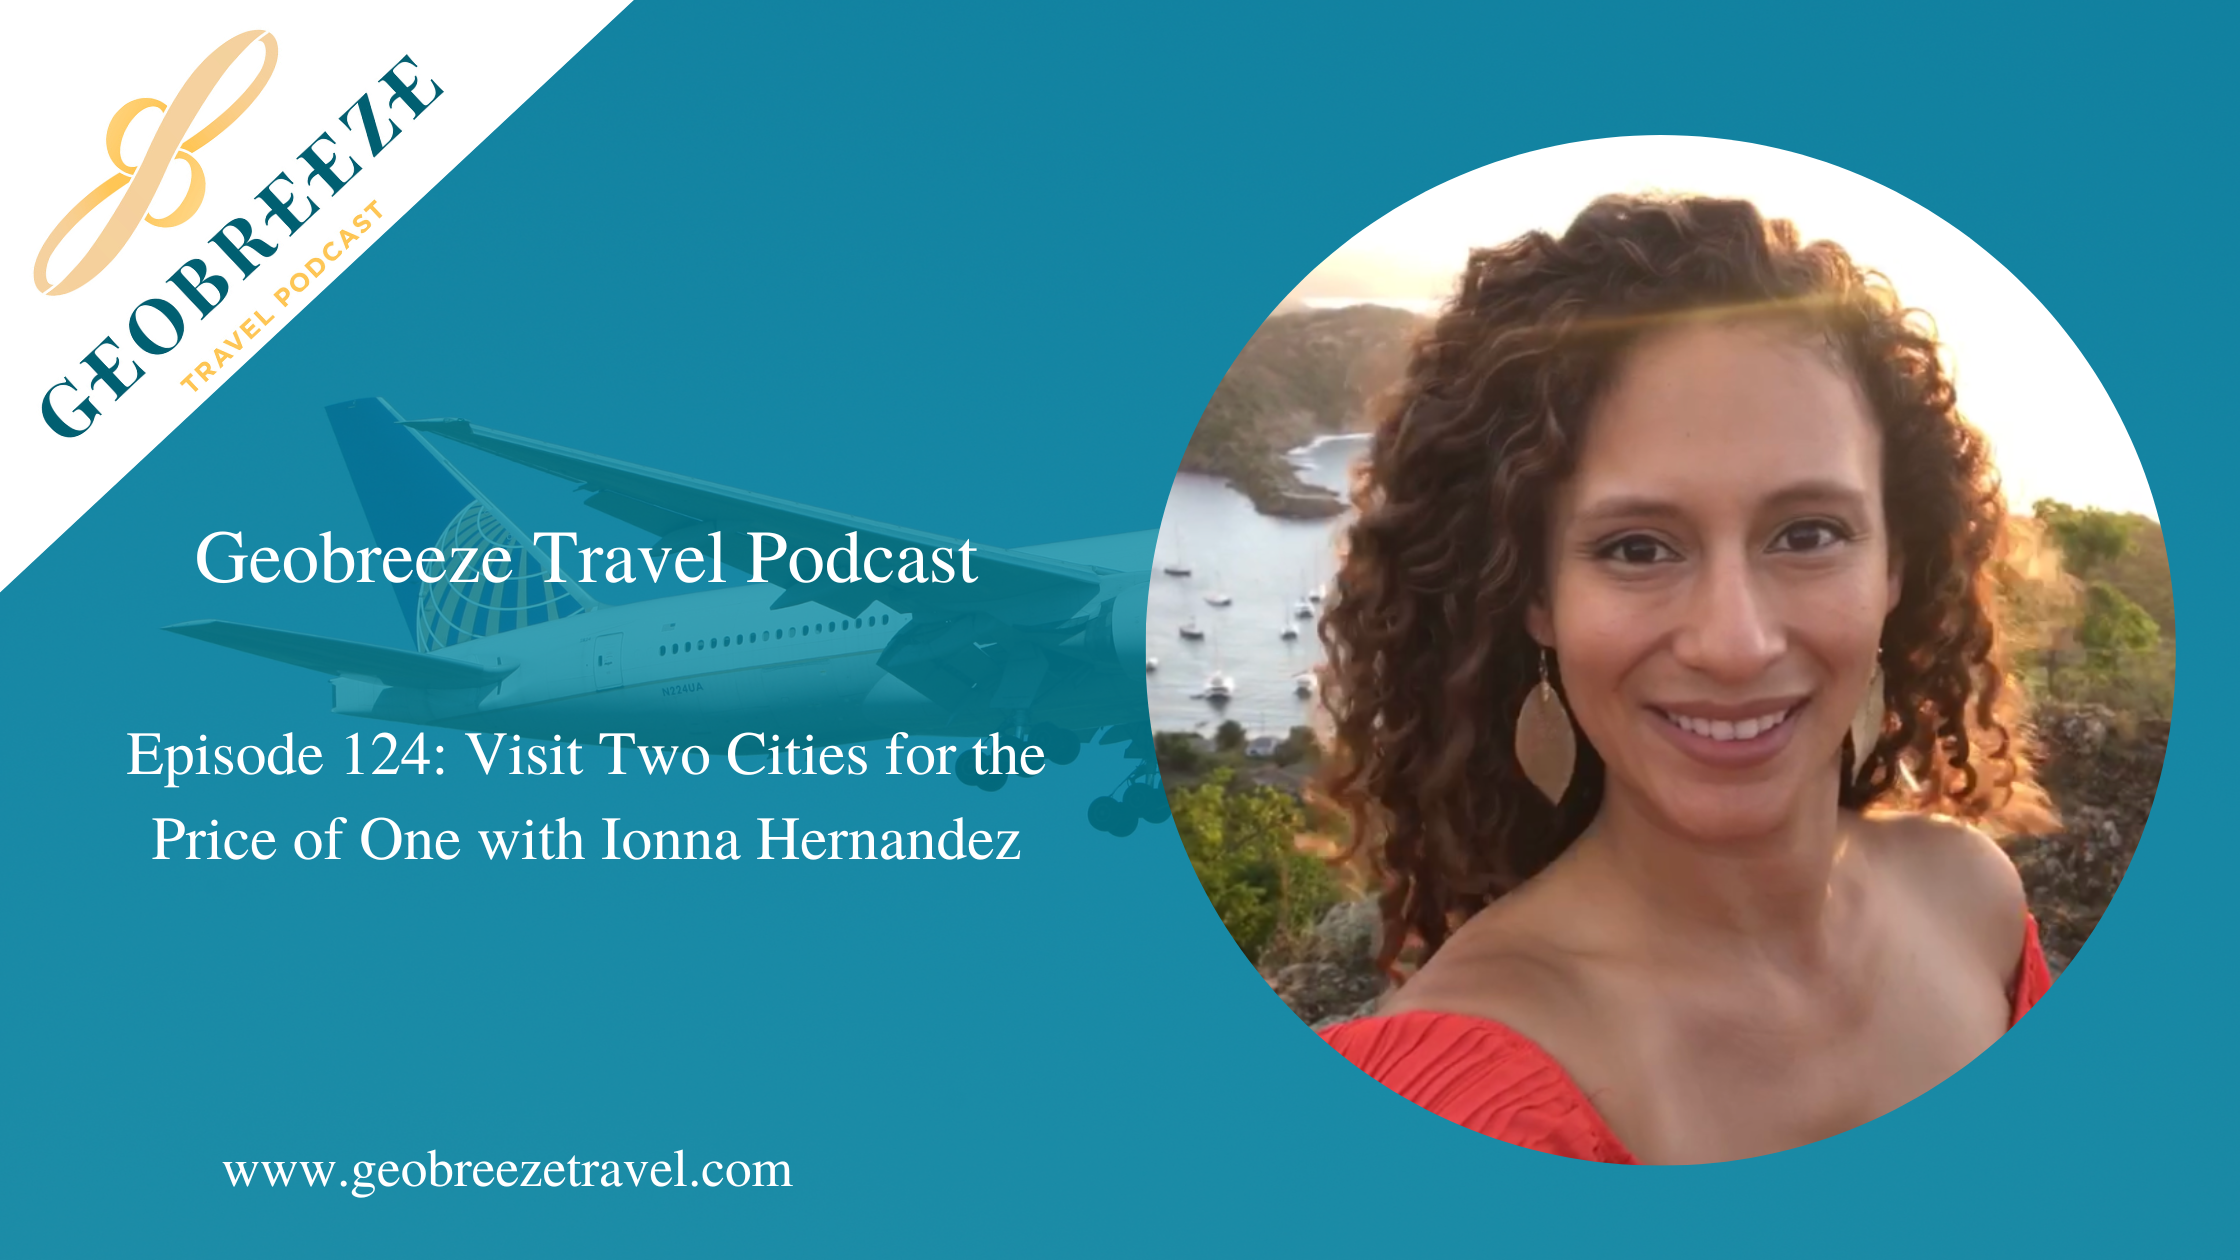 Episode 124: Deep Dives into United Airlines with Ionna Hernandez